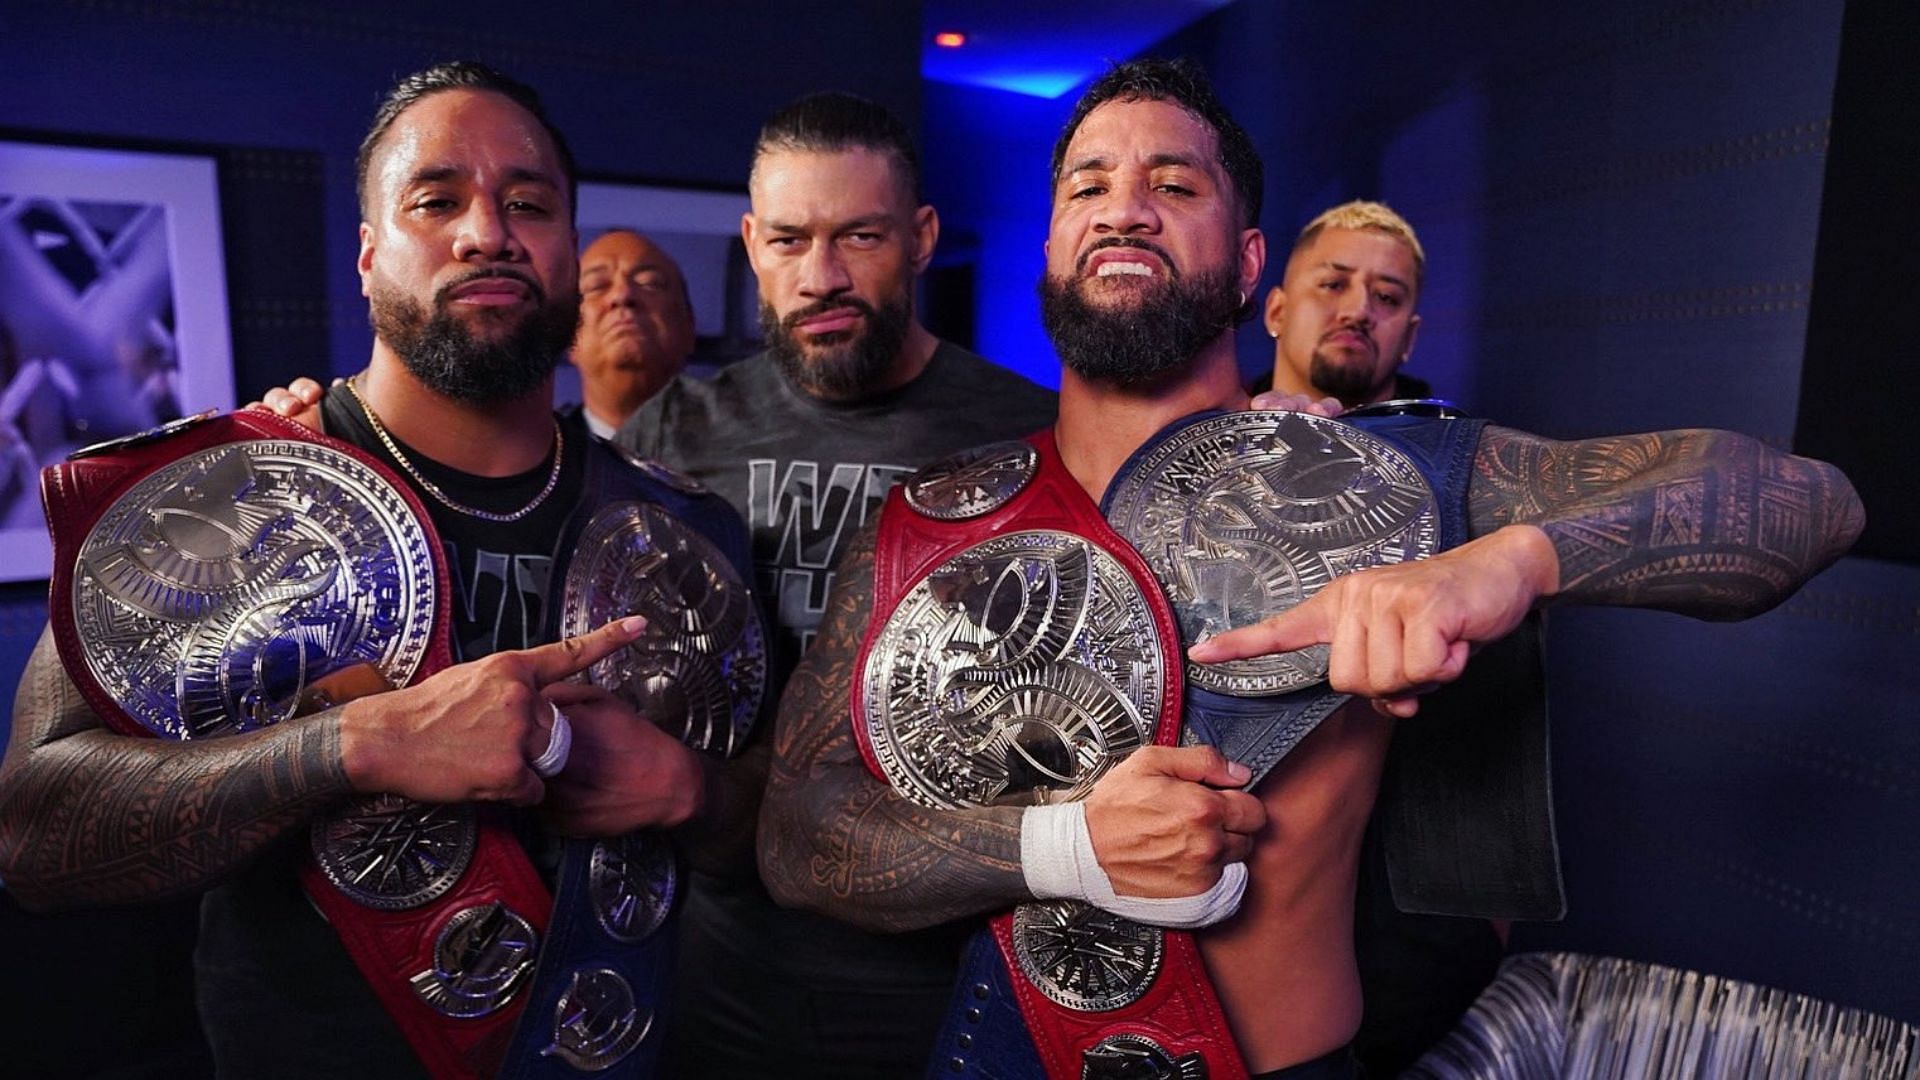 the-usos-wwe-might-be-awarding-new-tag-team-titles-to-the-usos-reports